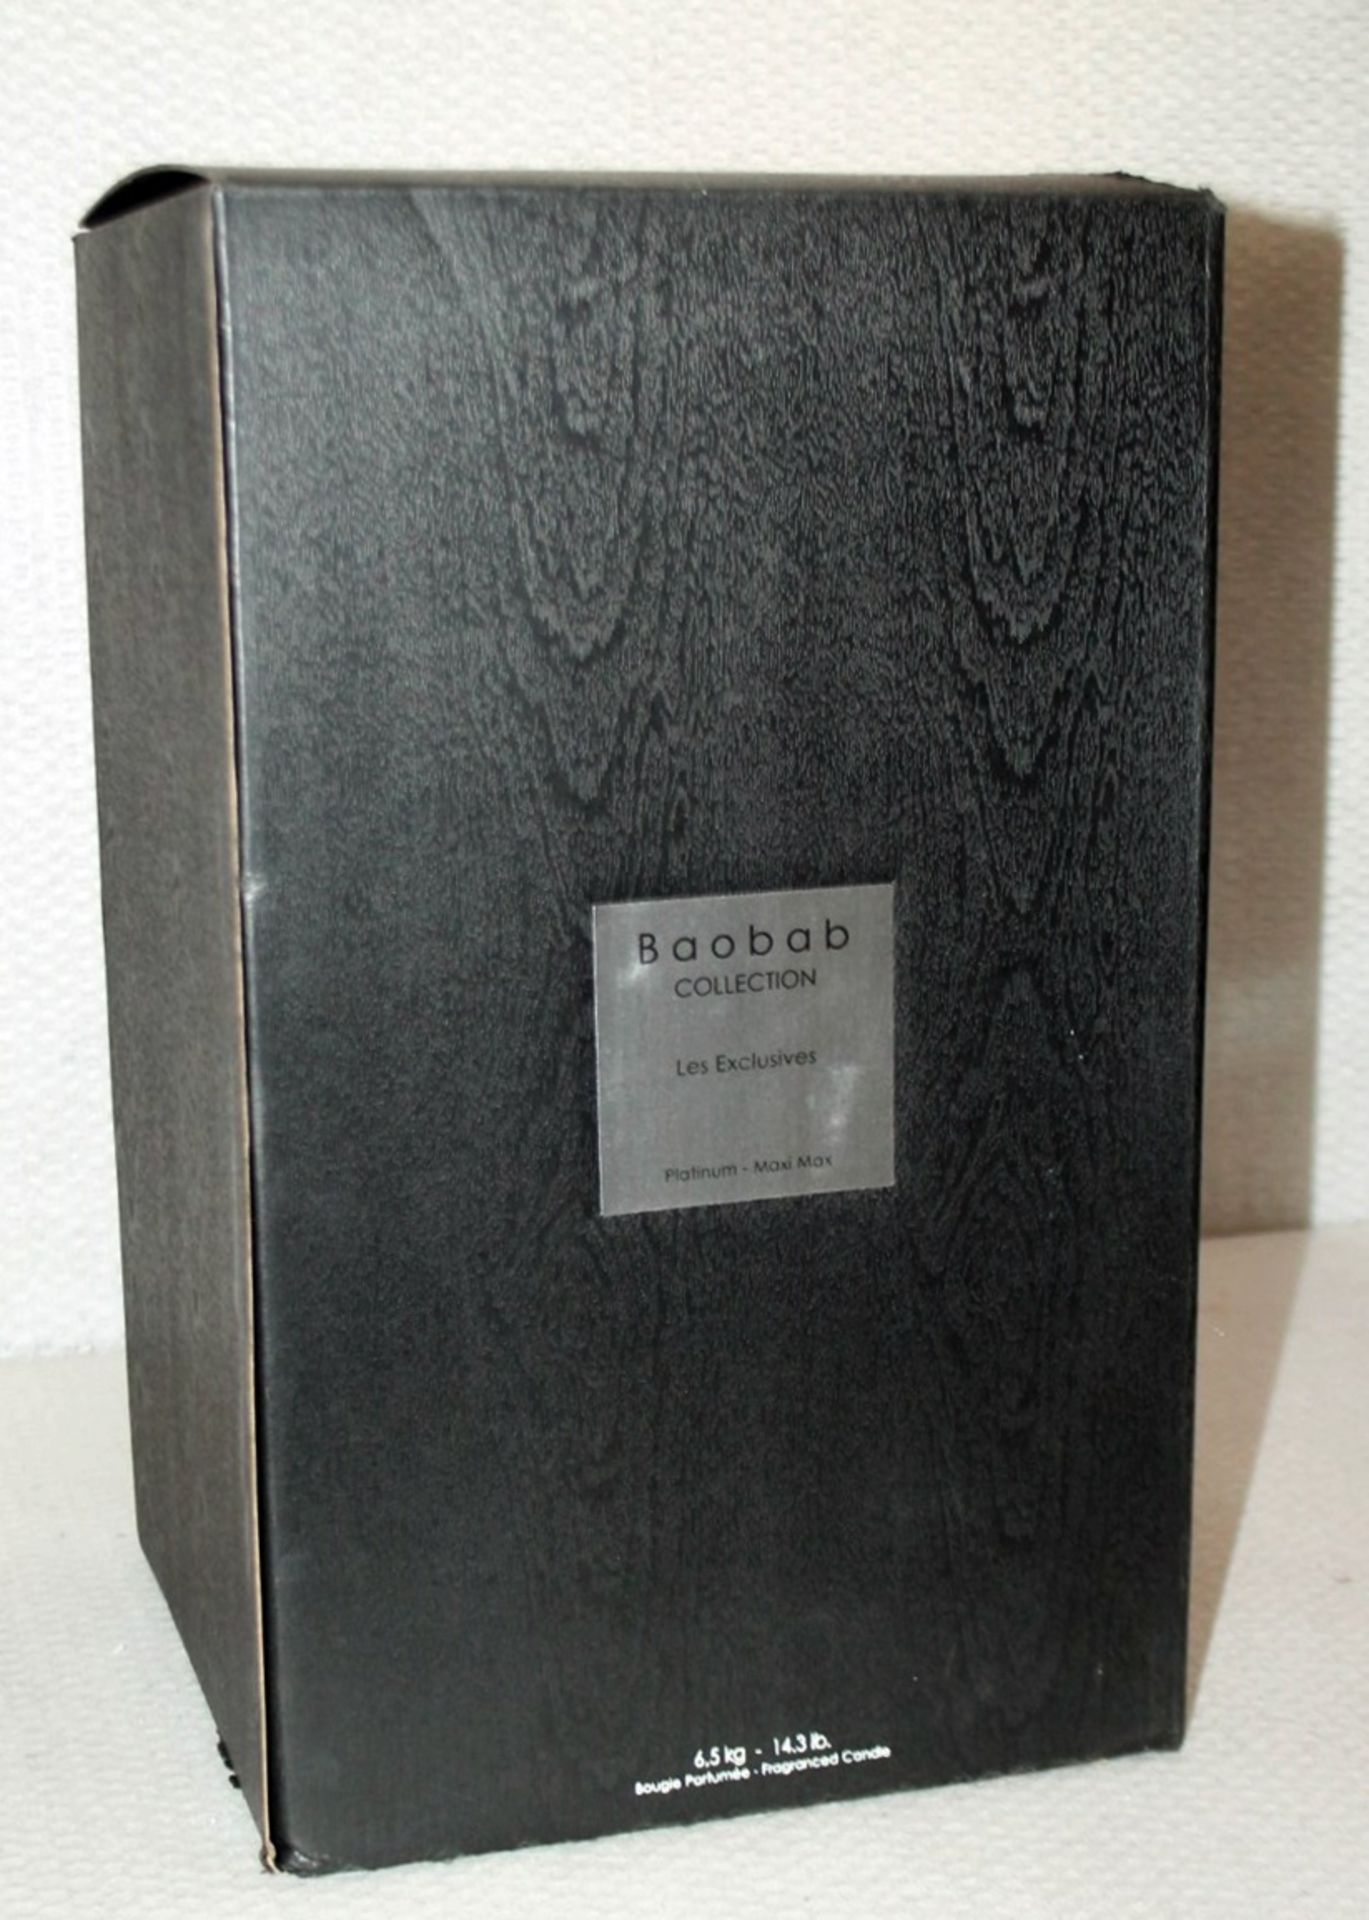 1 x BAOBAB COLLECTION Large 6.5kg 'Les Exclusives' Scented Candle (H35cm) - Original Price £465.00 - - Image 6 of 7